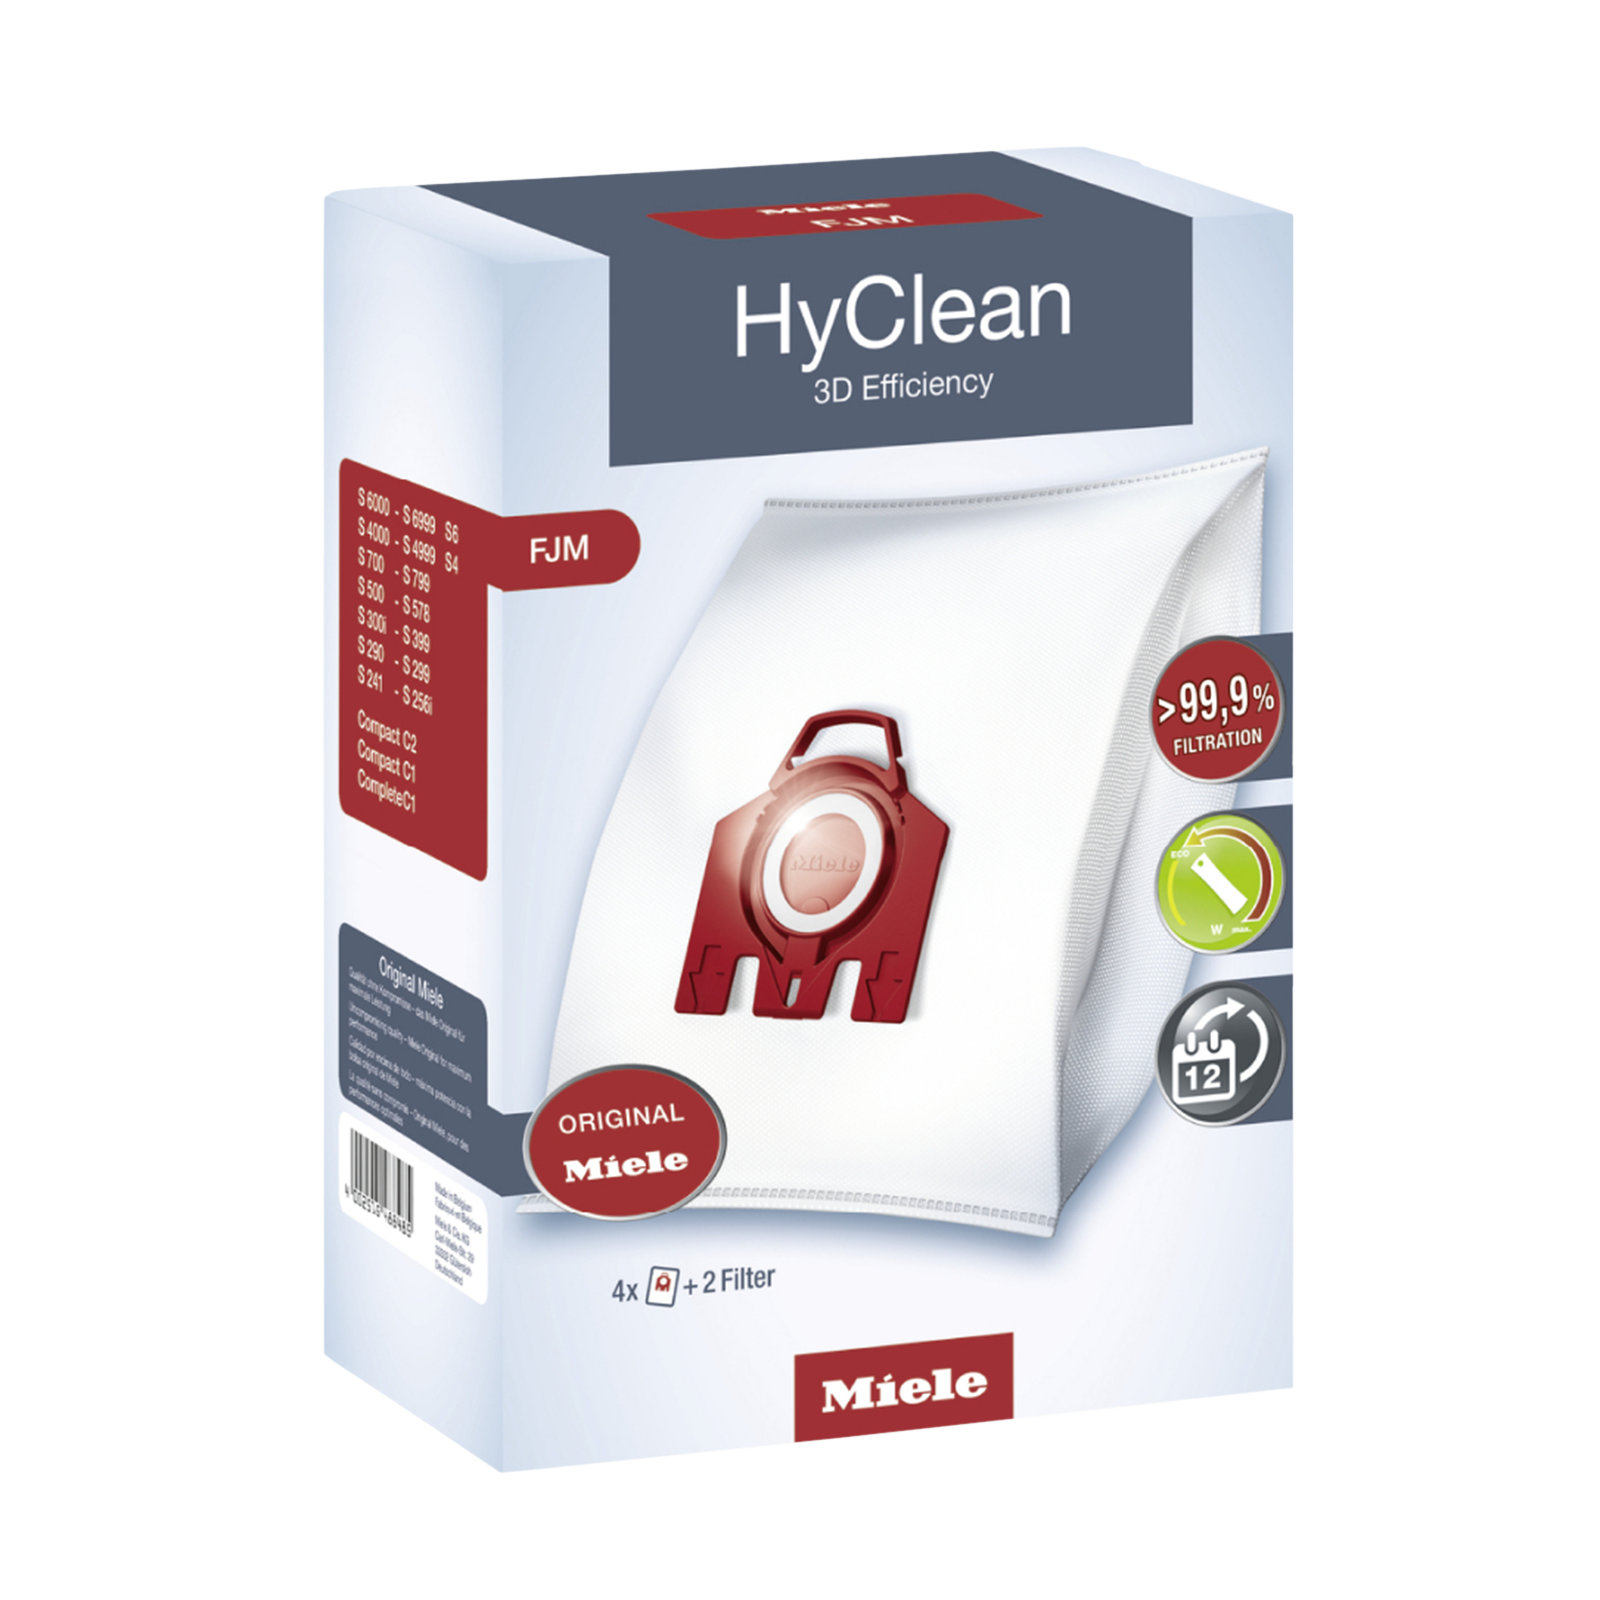 Miele FJM Hyclean for C2 Vacuum Cleaner (Hygienic Replacement, 41996571, White)